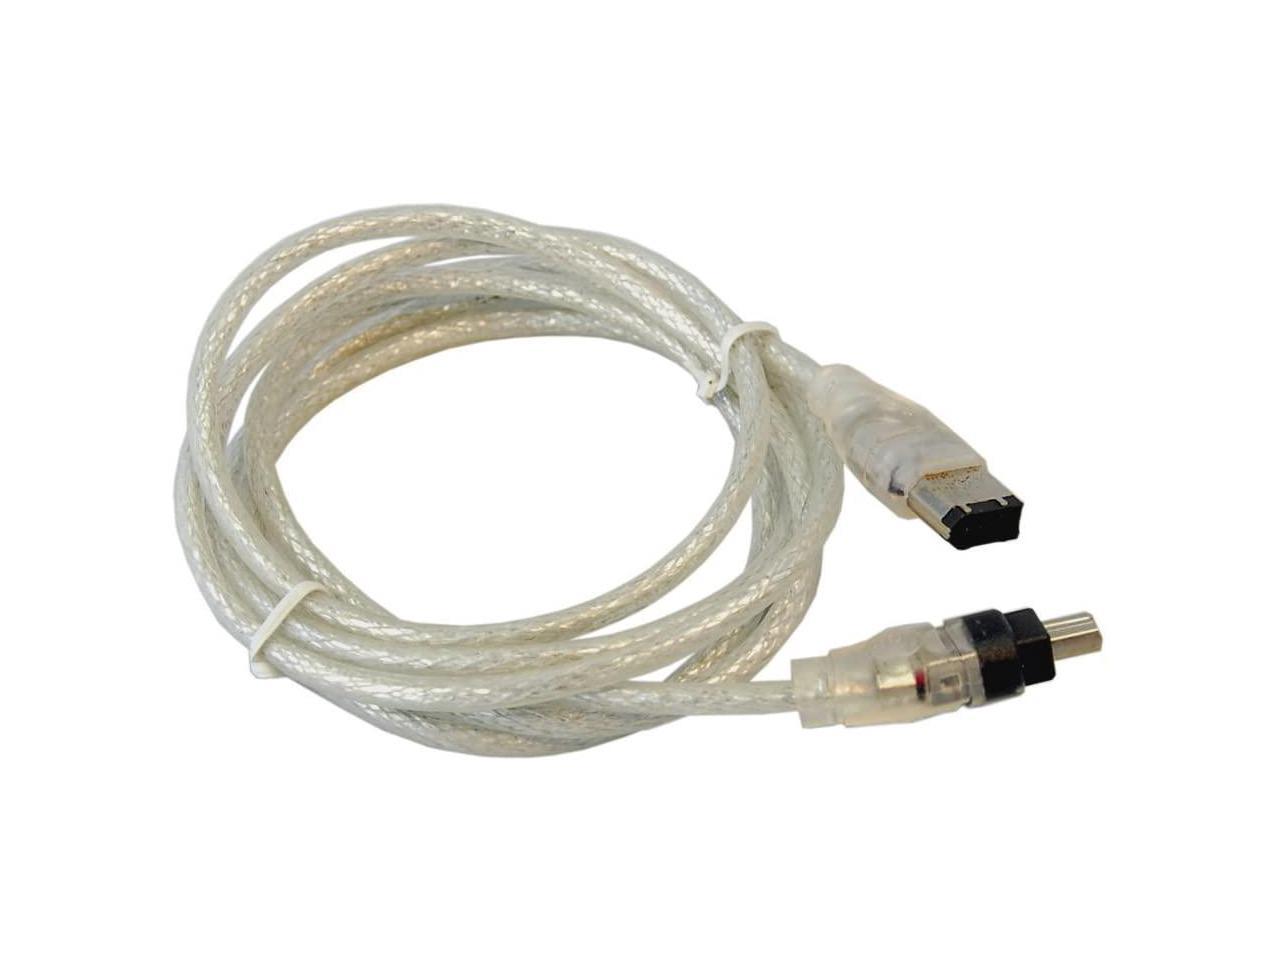 HJFPOWERCORD Replacement for Belkin 1394 Firewire Compliant Cable Cord Connector 